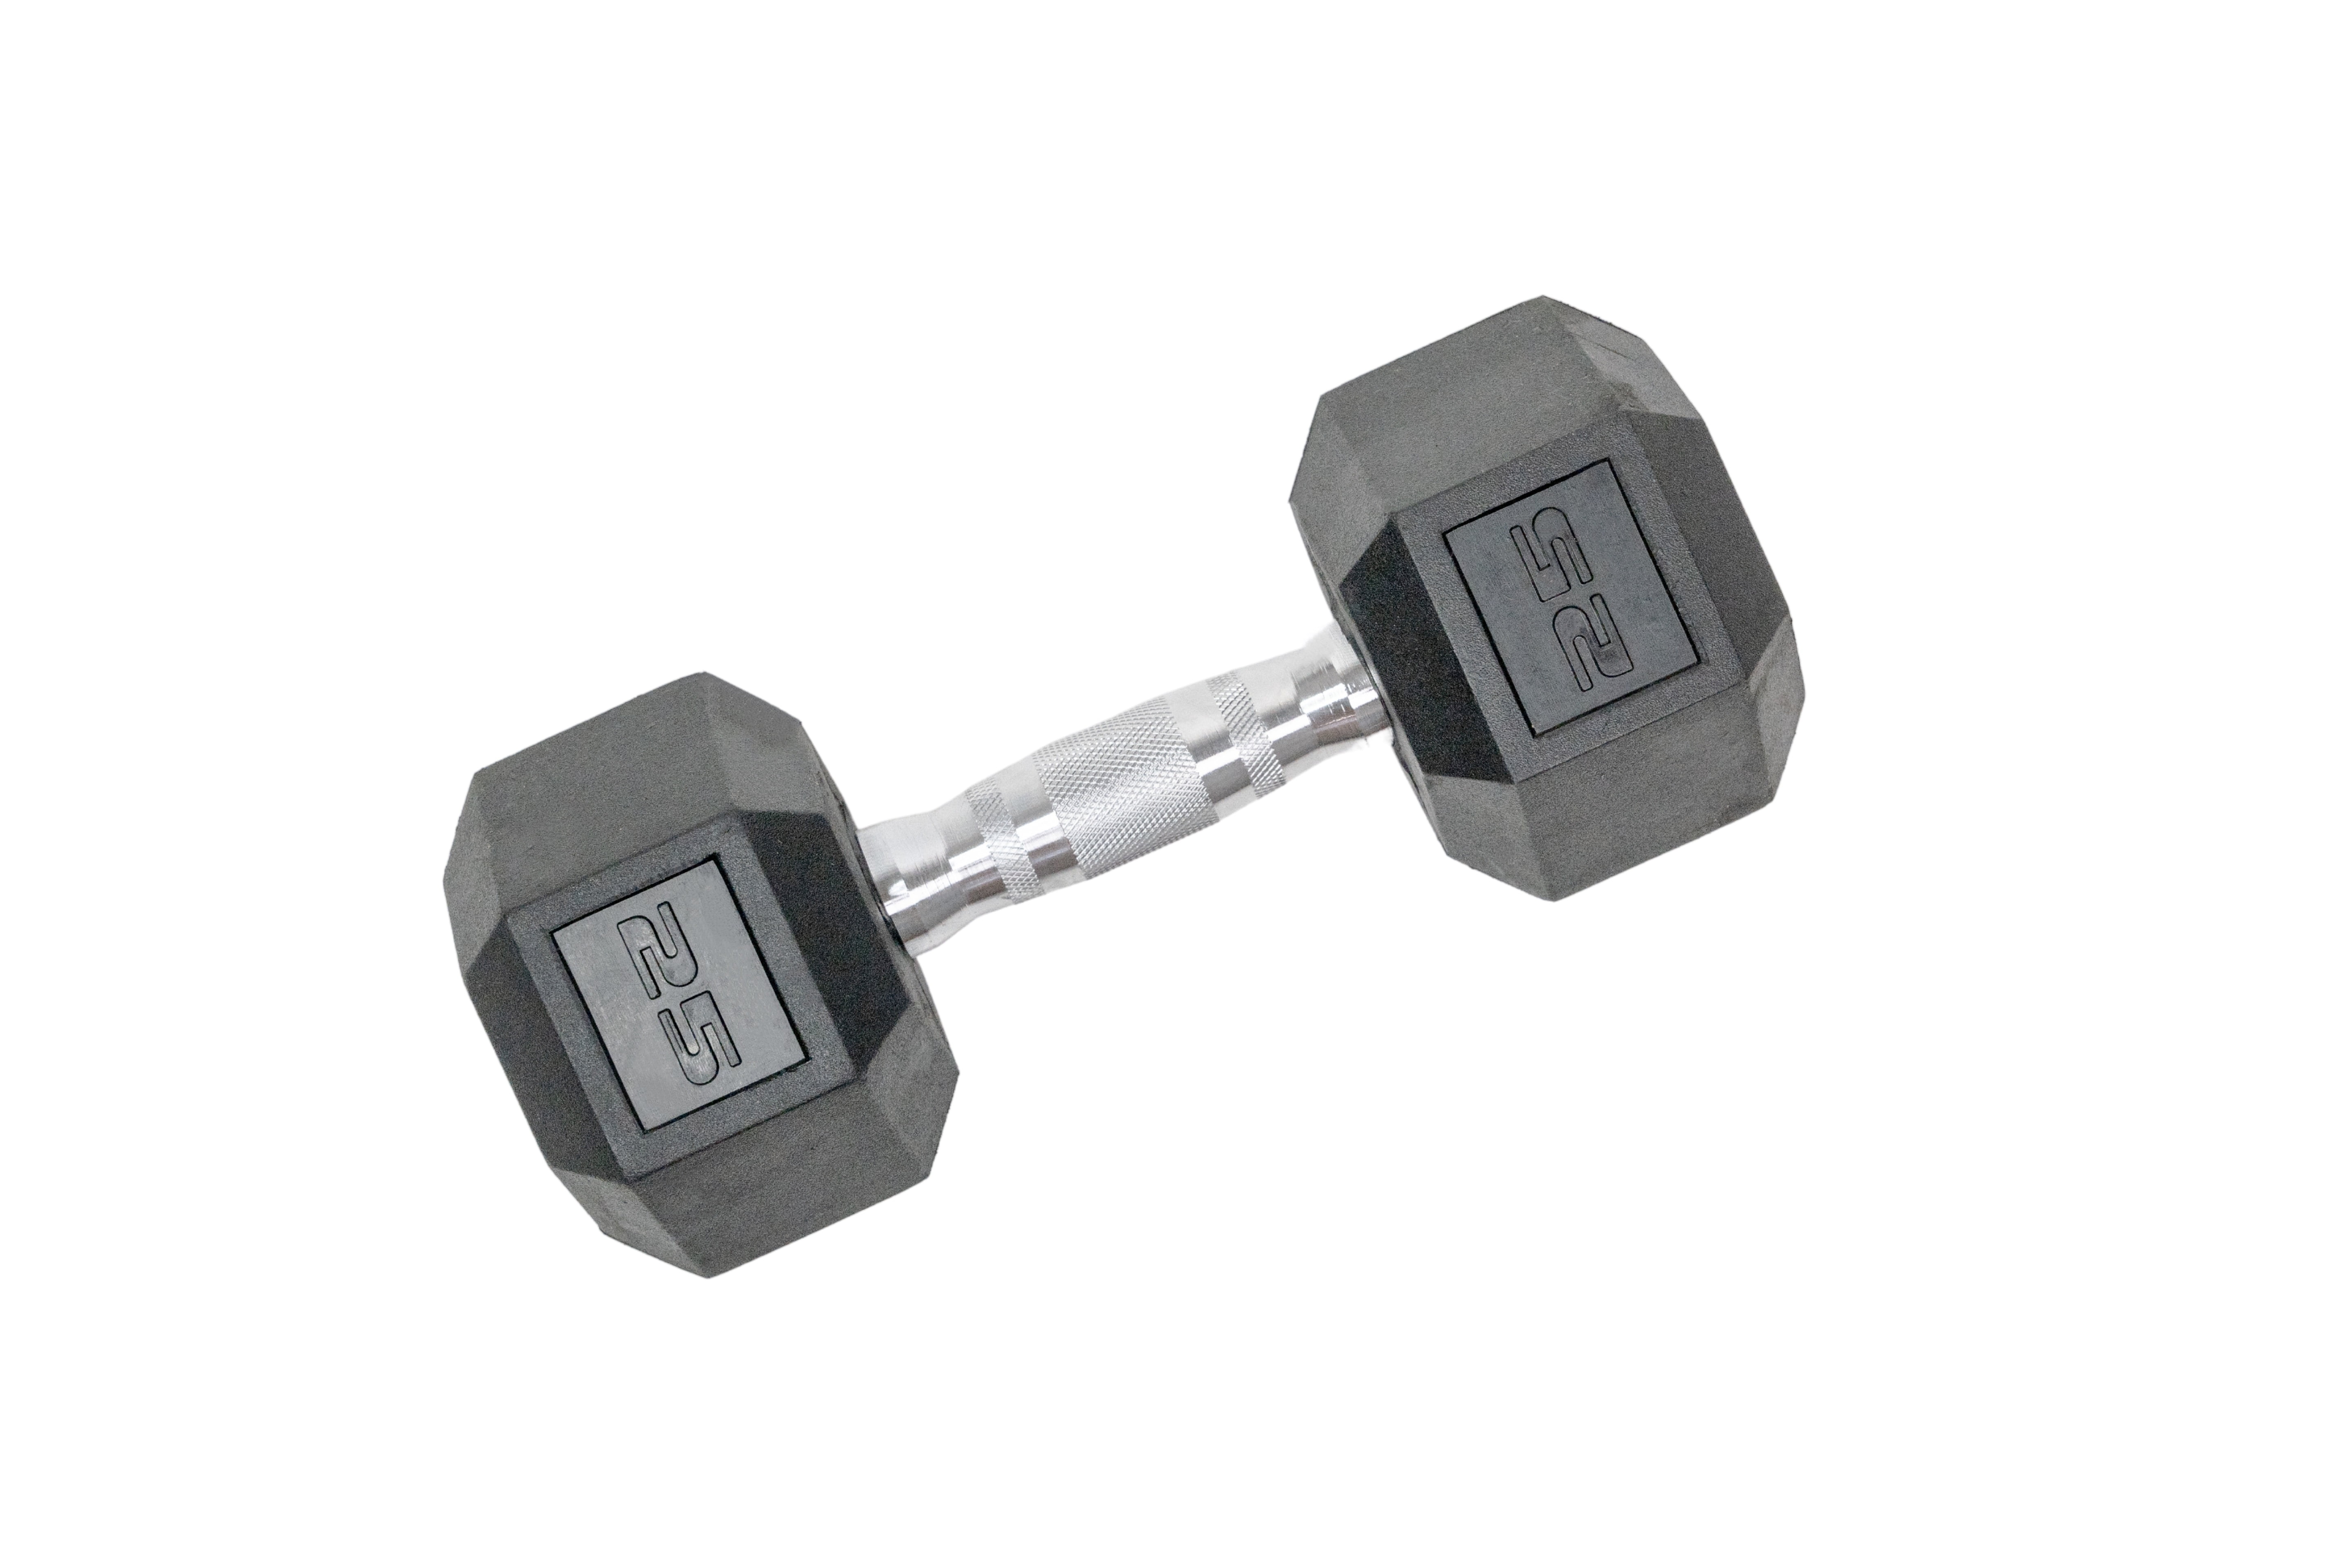 Hexagonal Shape Featuring Ergonomic Chrome-Plated Handles and Durable Hex Rubber Heads Solid Cast-Iron Core Tru Grit Fitness Rubber Hex Dumbbells 